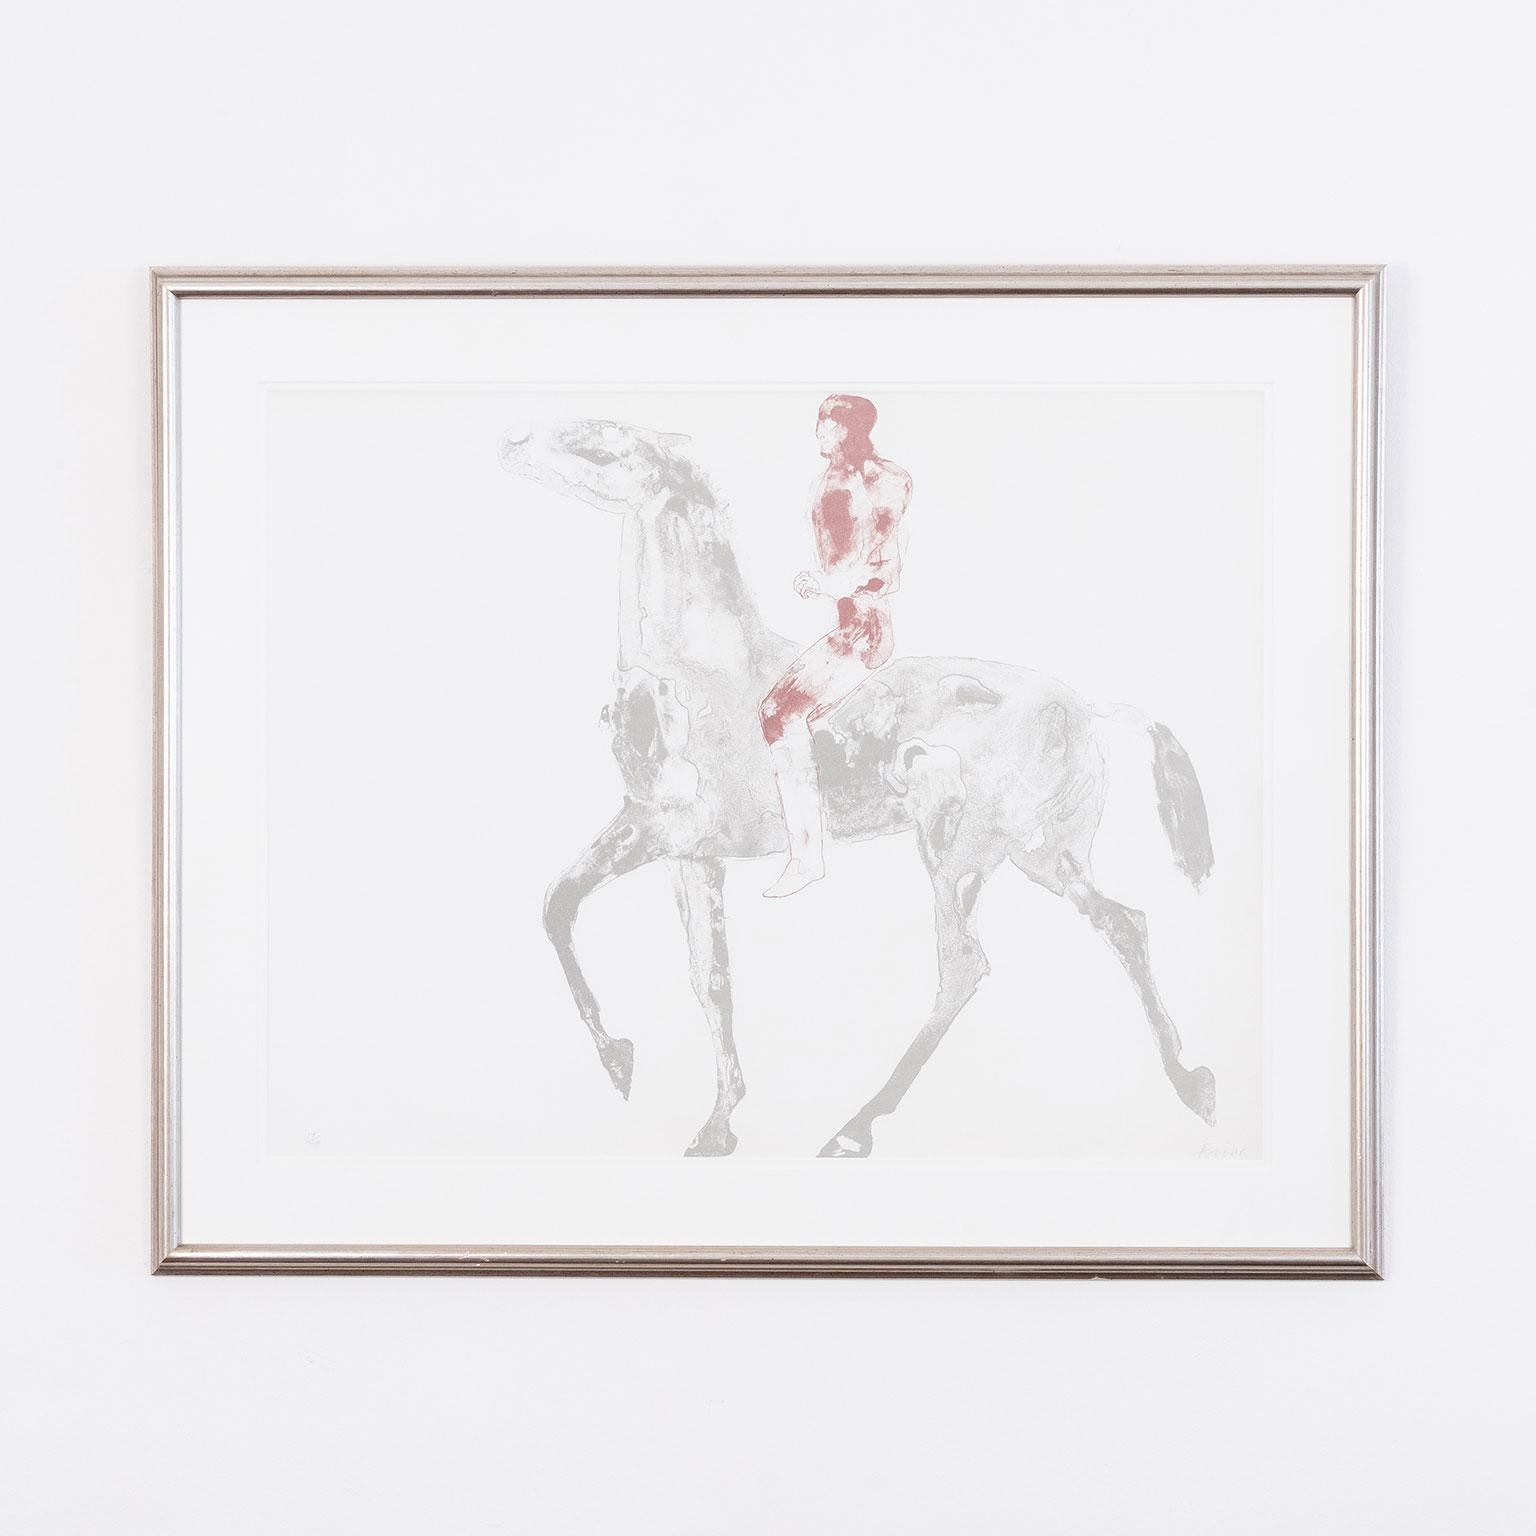 "Horse and Rider I"   1970  Lithograph  Signed and numbered by artist - Print by Elisabeth Frink